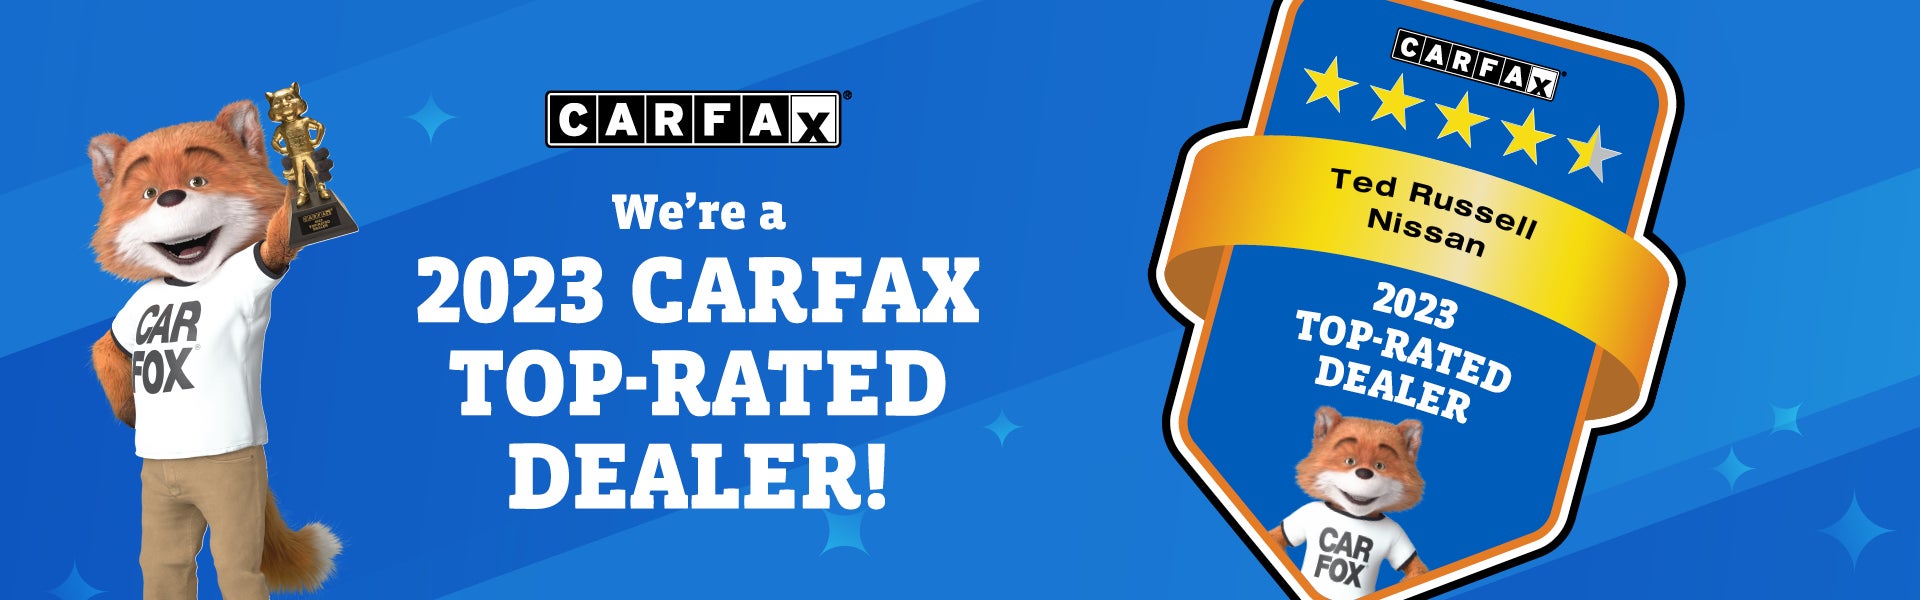 We are 2023 Carfax Top-Rated Dealer!